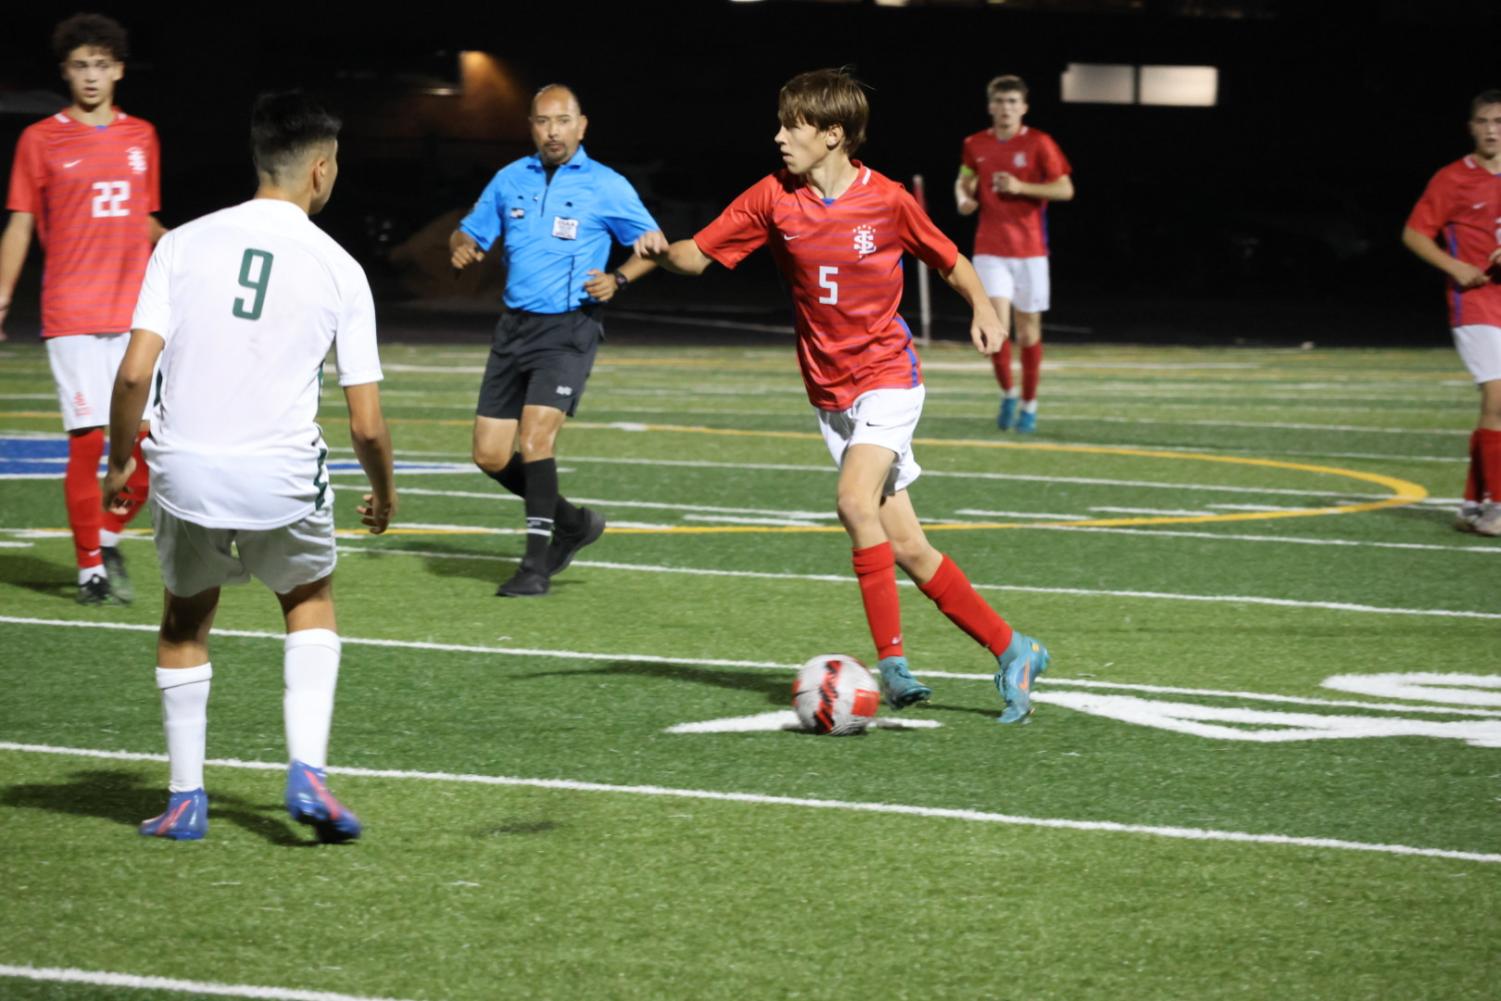 Photo+Story%3A+La+Salle+Varsity+Boys+Soccer+Wins+First+League+Game